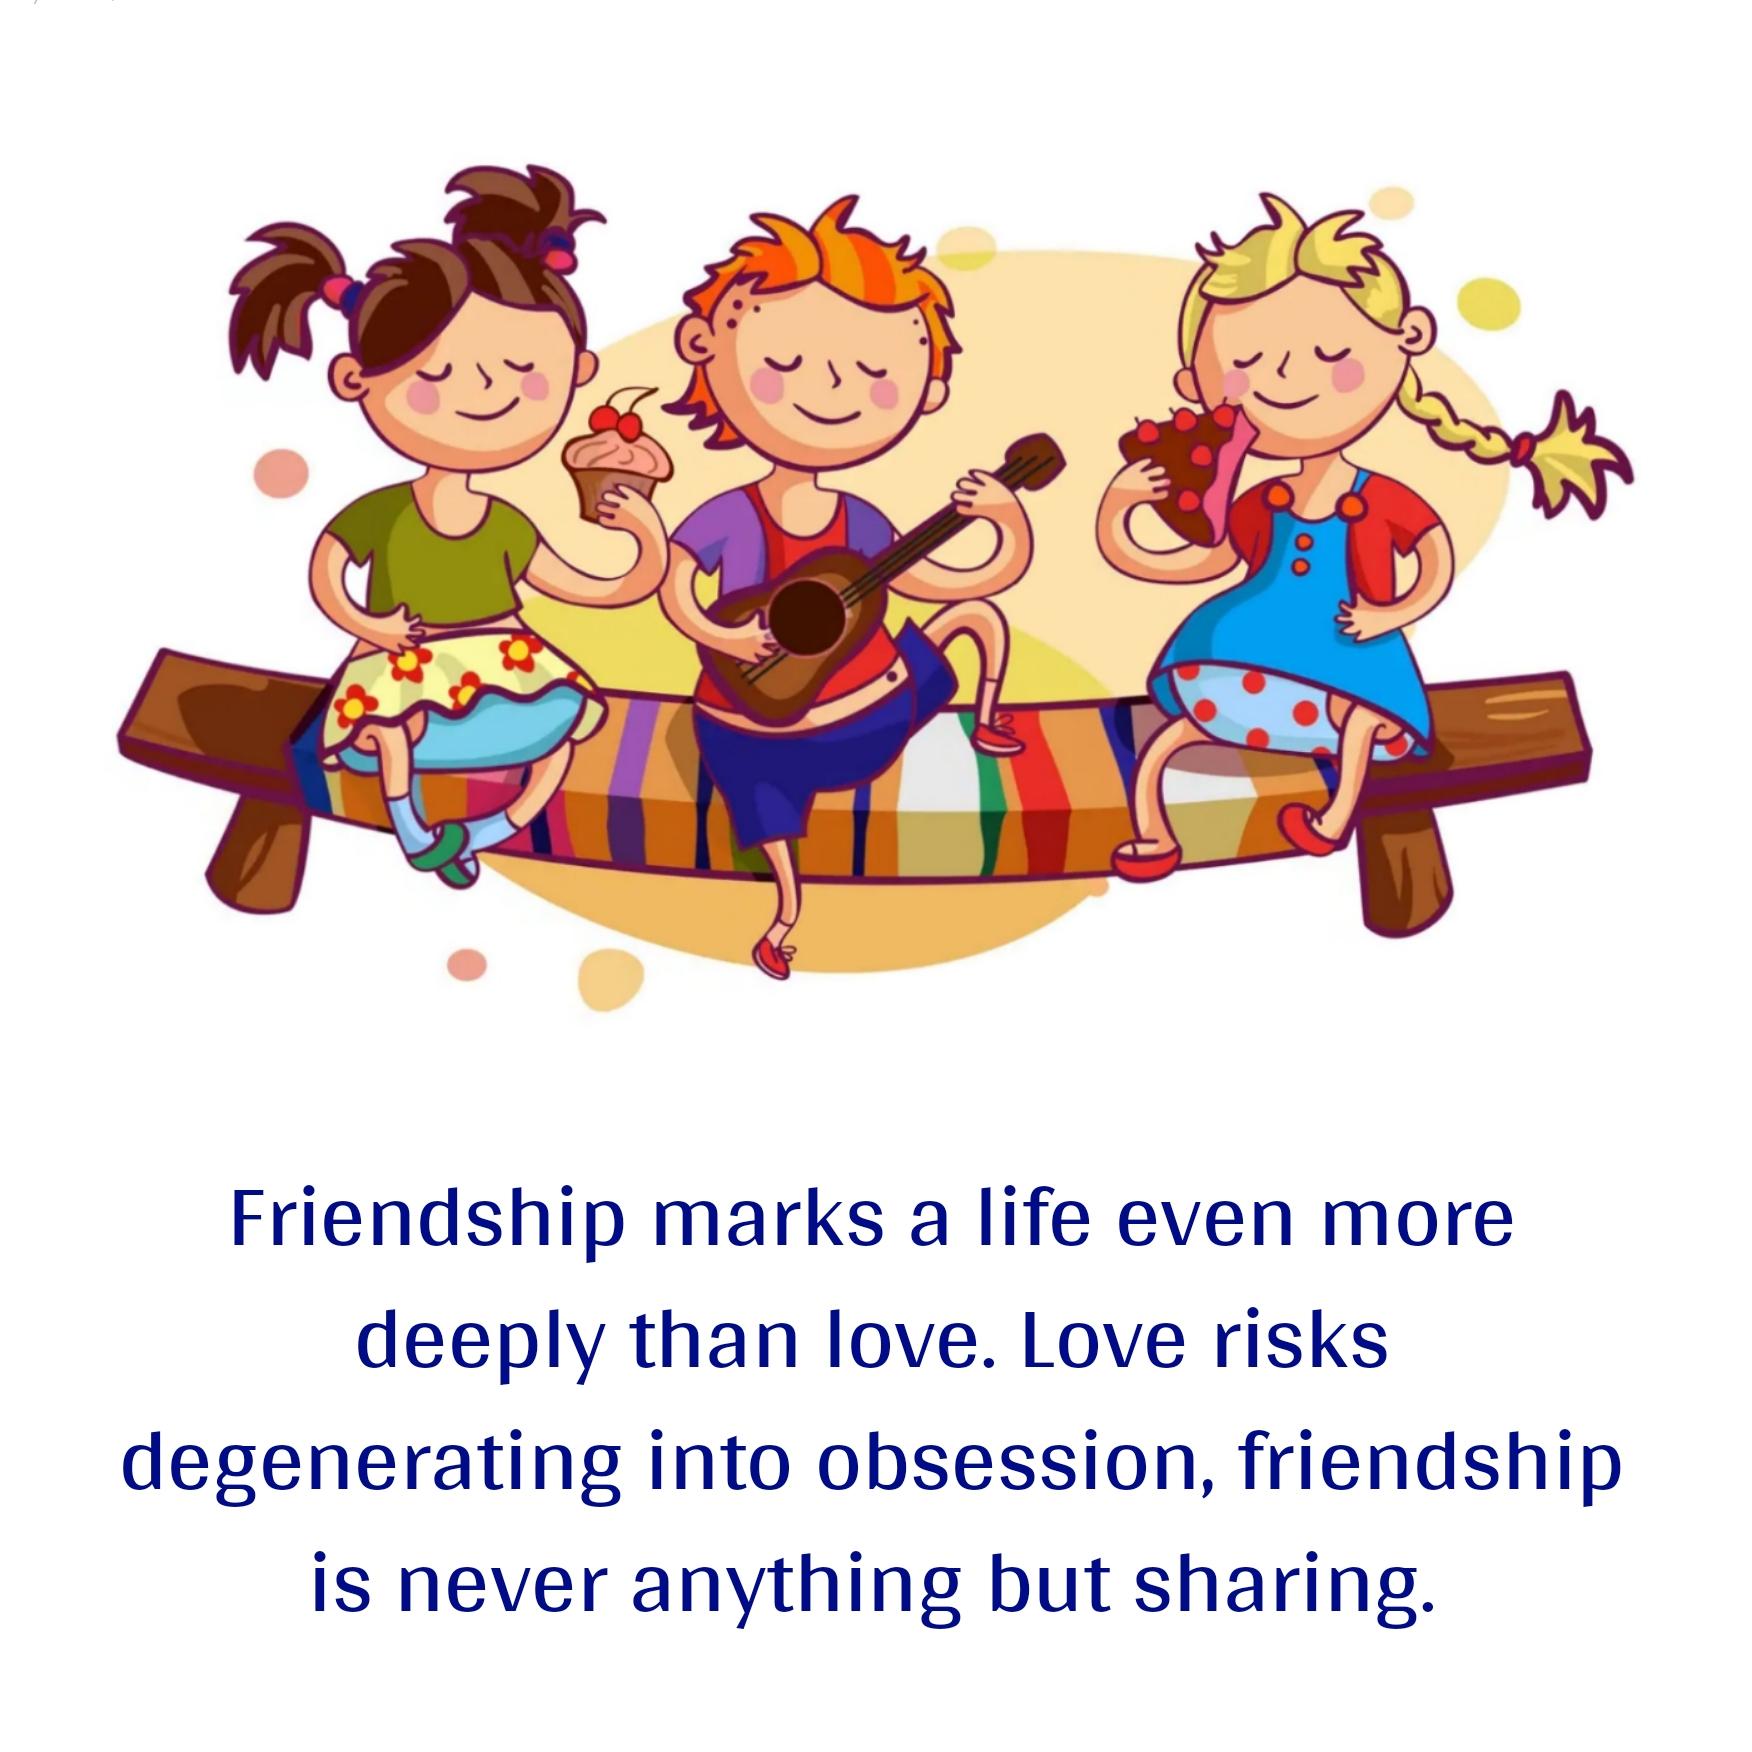 Friendship marks a life even more deeply than love